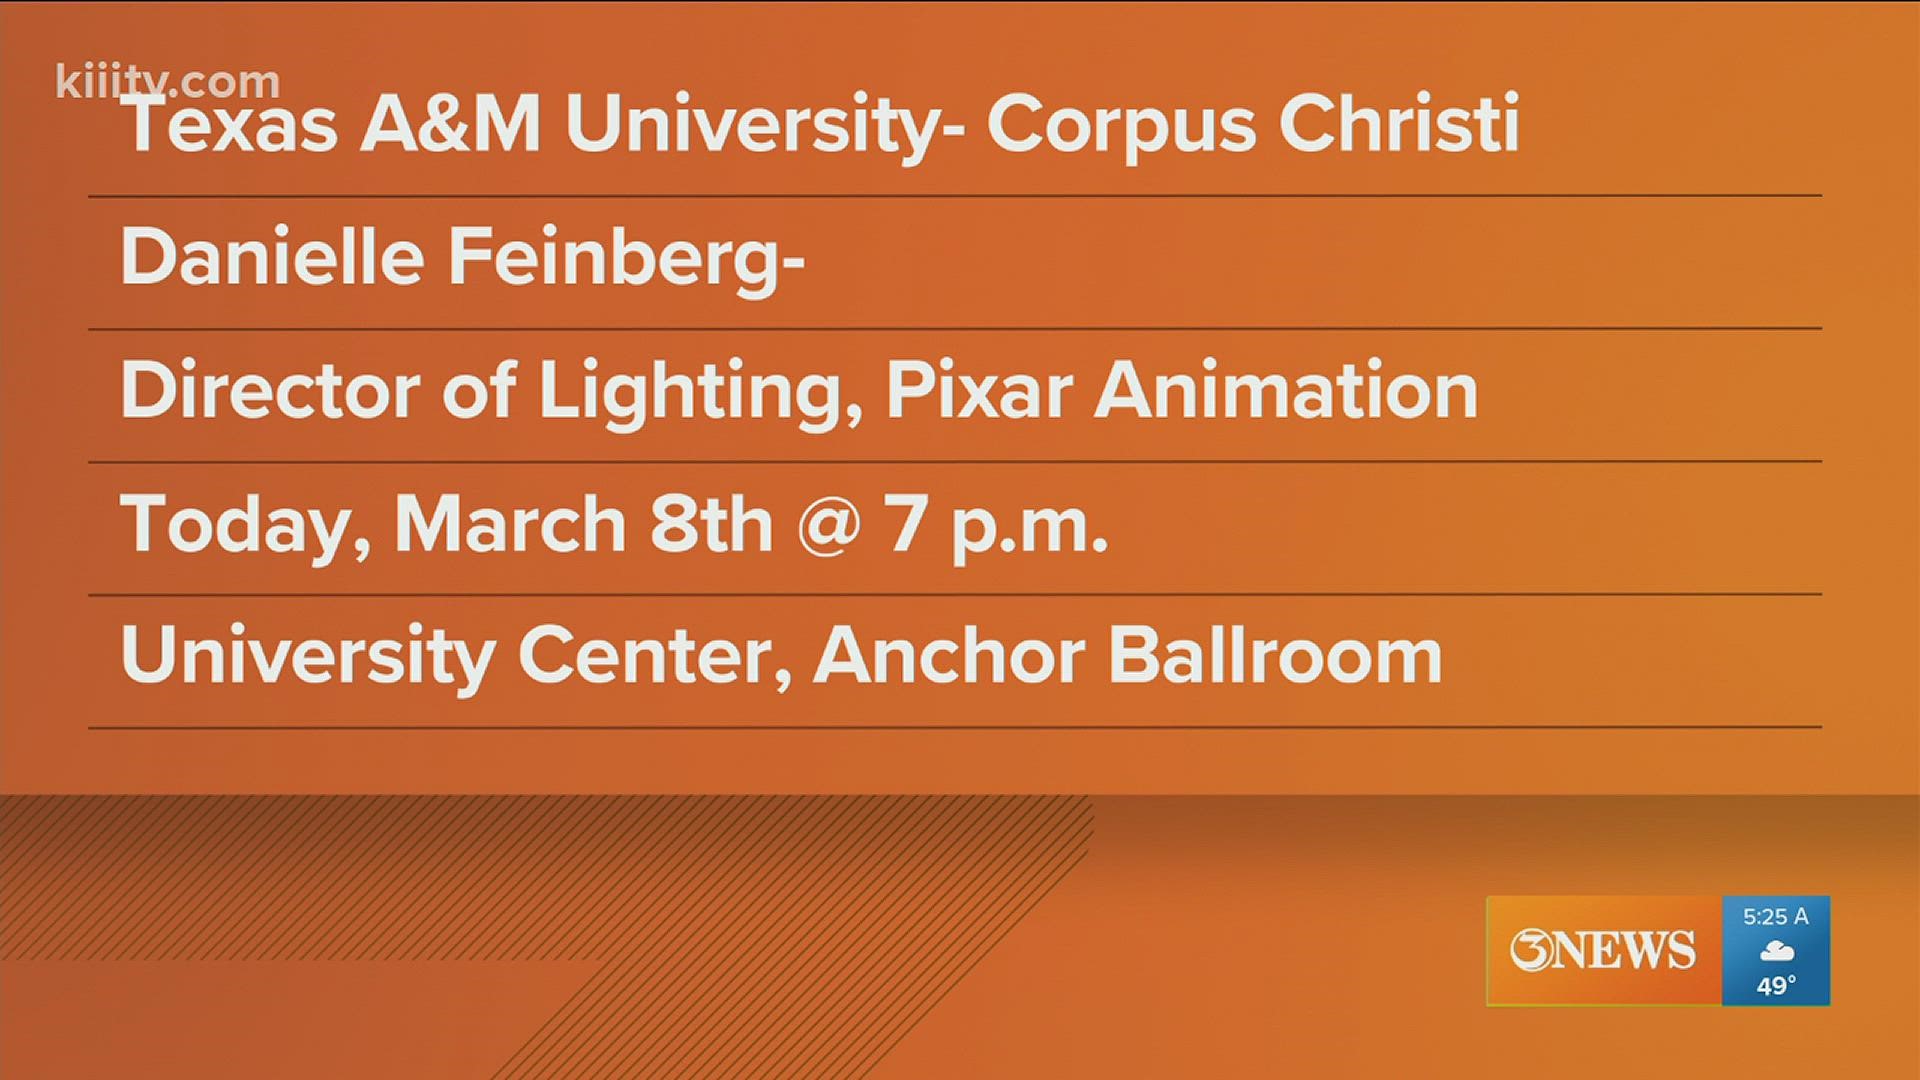 As part of their Distinguished Speaker series, TAMUCC will be hosting Disney Animator Danielle Feinberg for an International Women's Day event